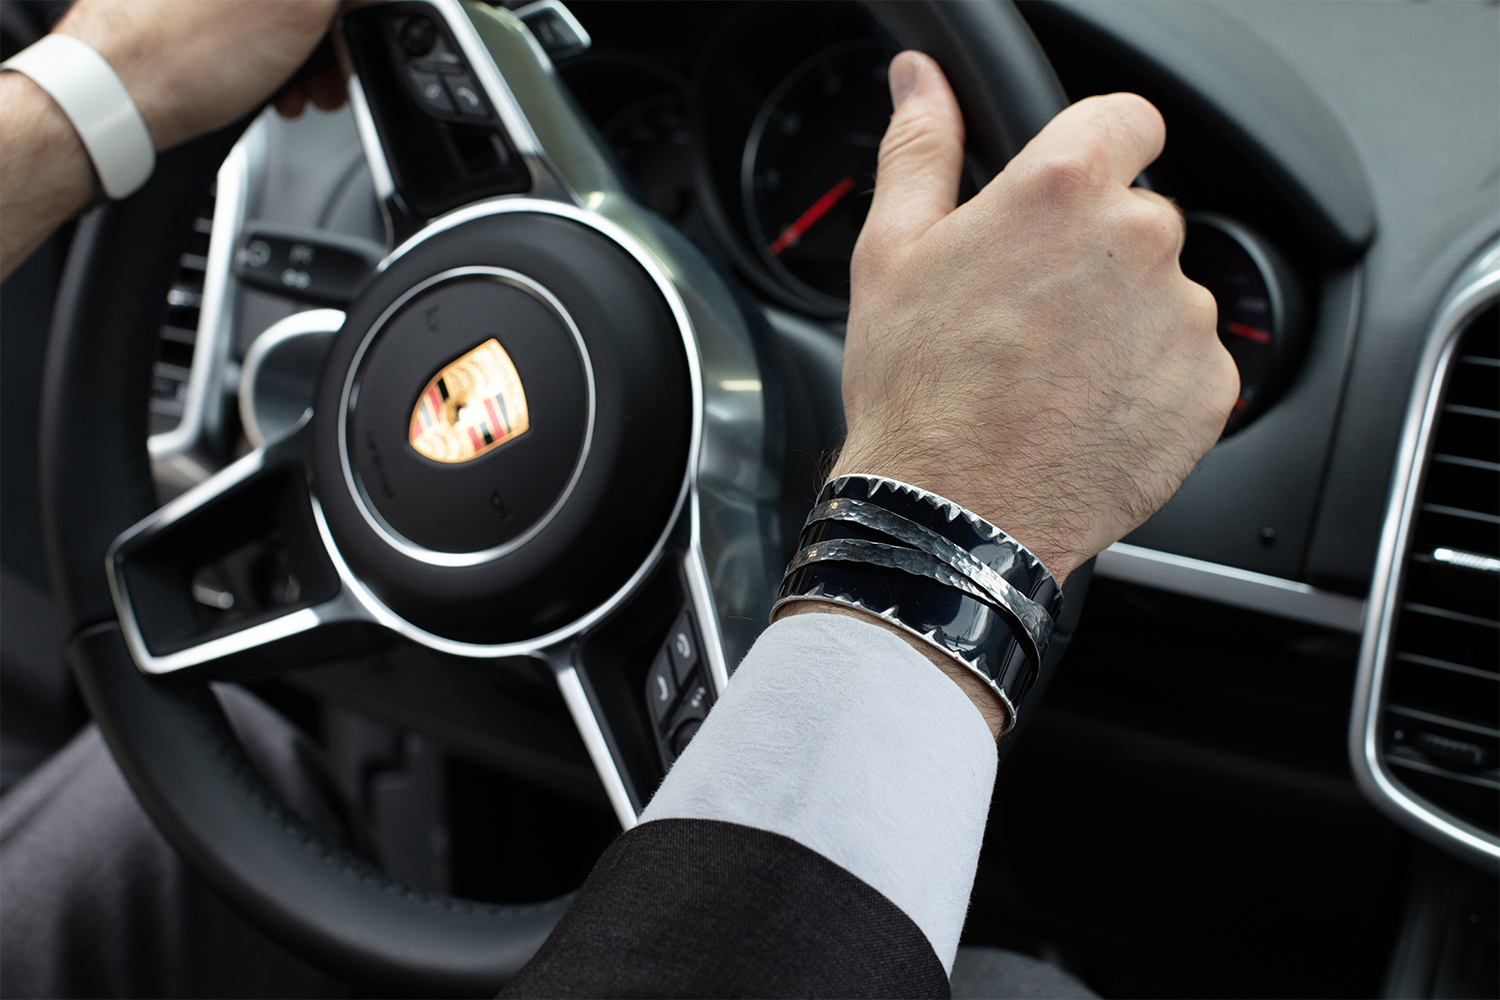 The Bentley Arnage Cuff from Crash Jewelry, seen here on a man's wrist, is made from the fender of a Bentley Arnage Limousine